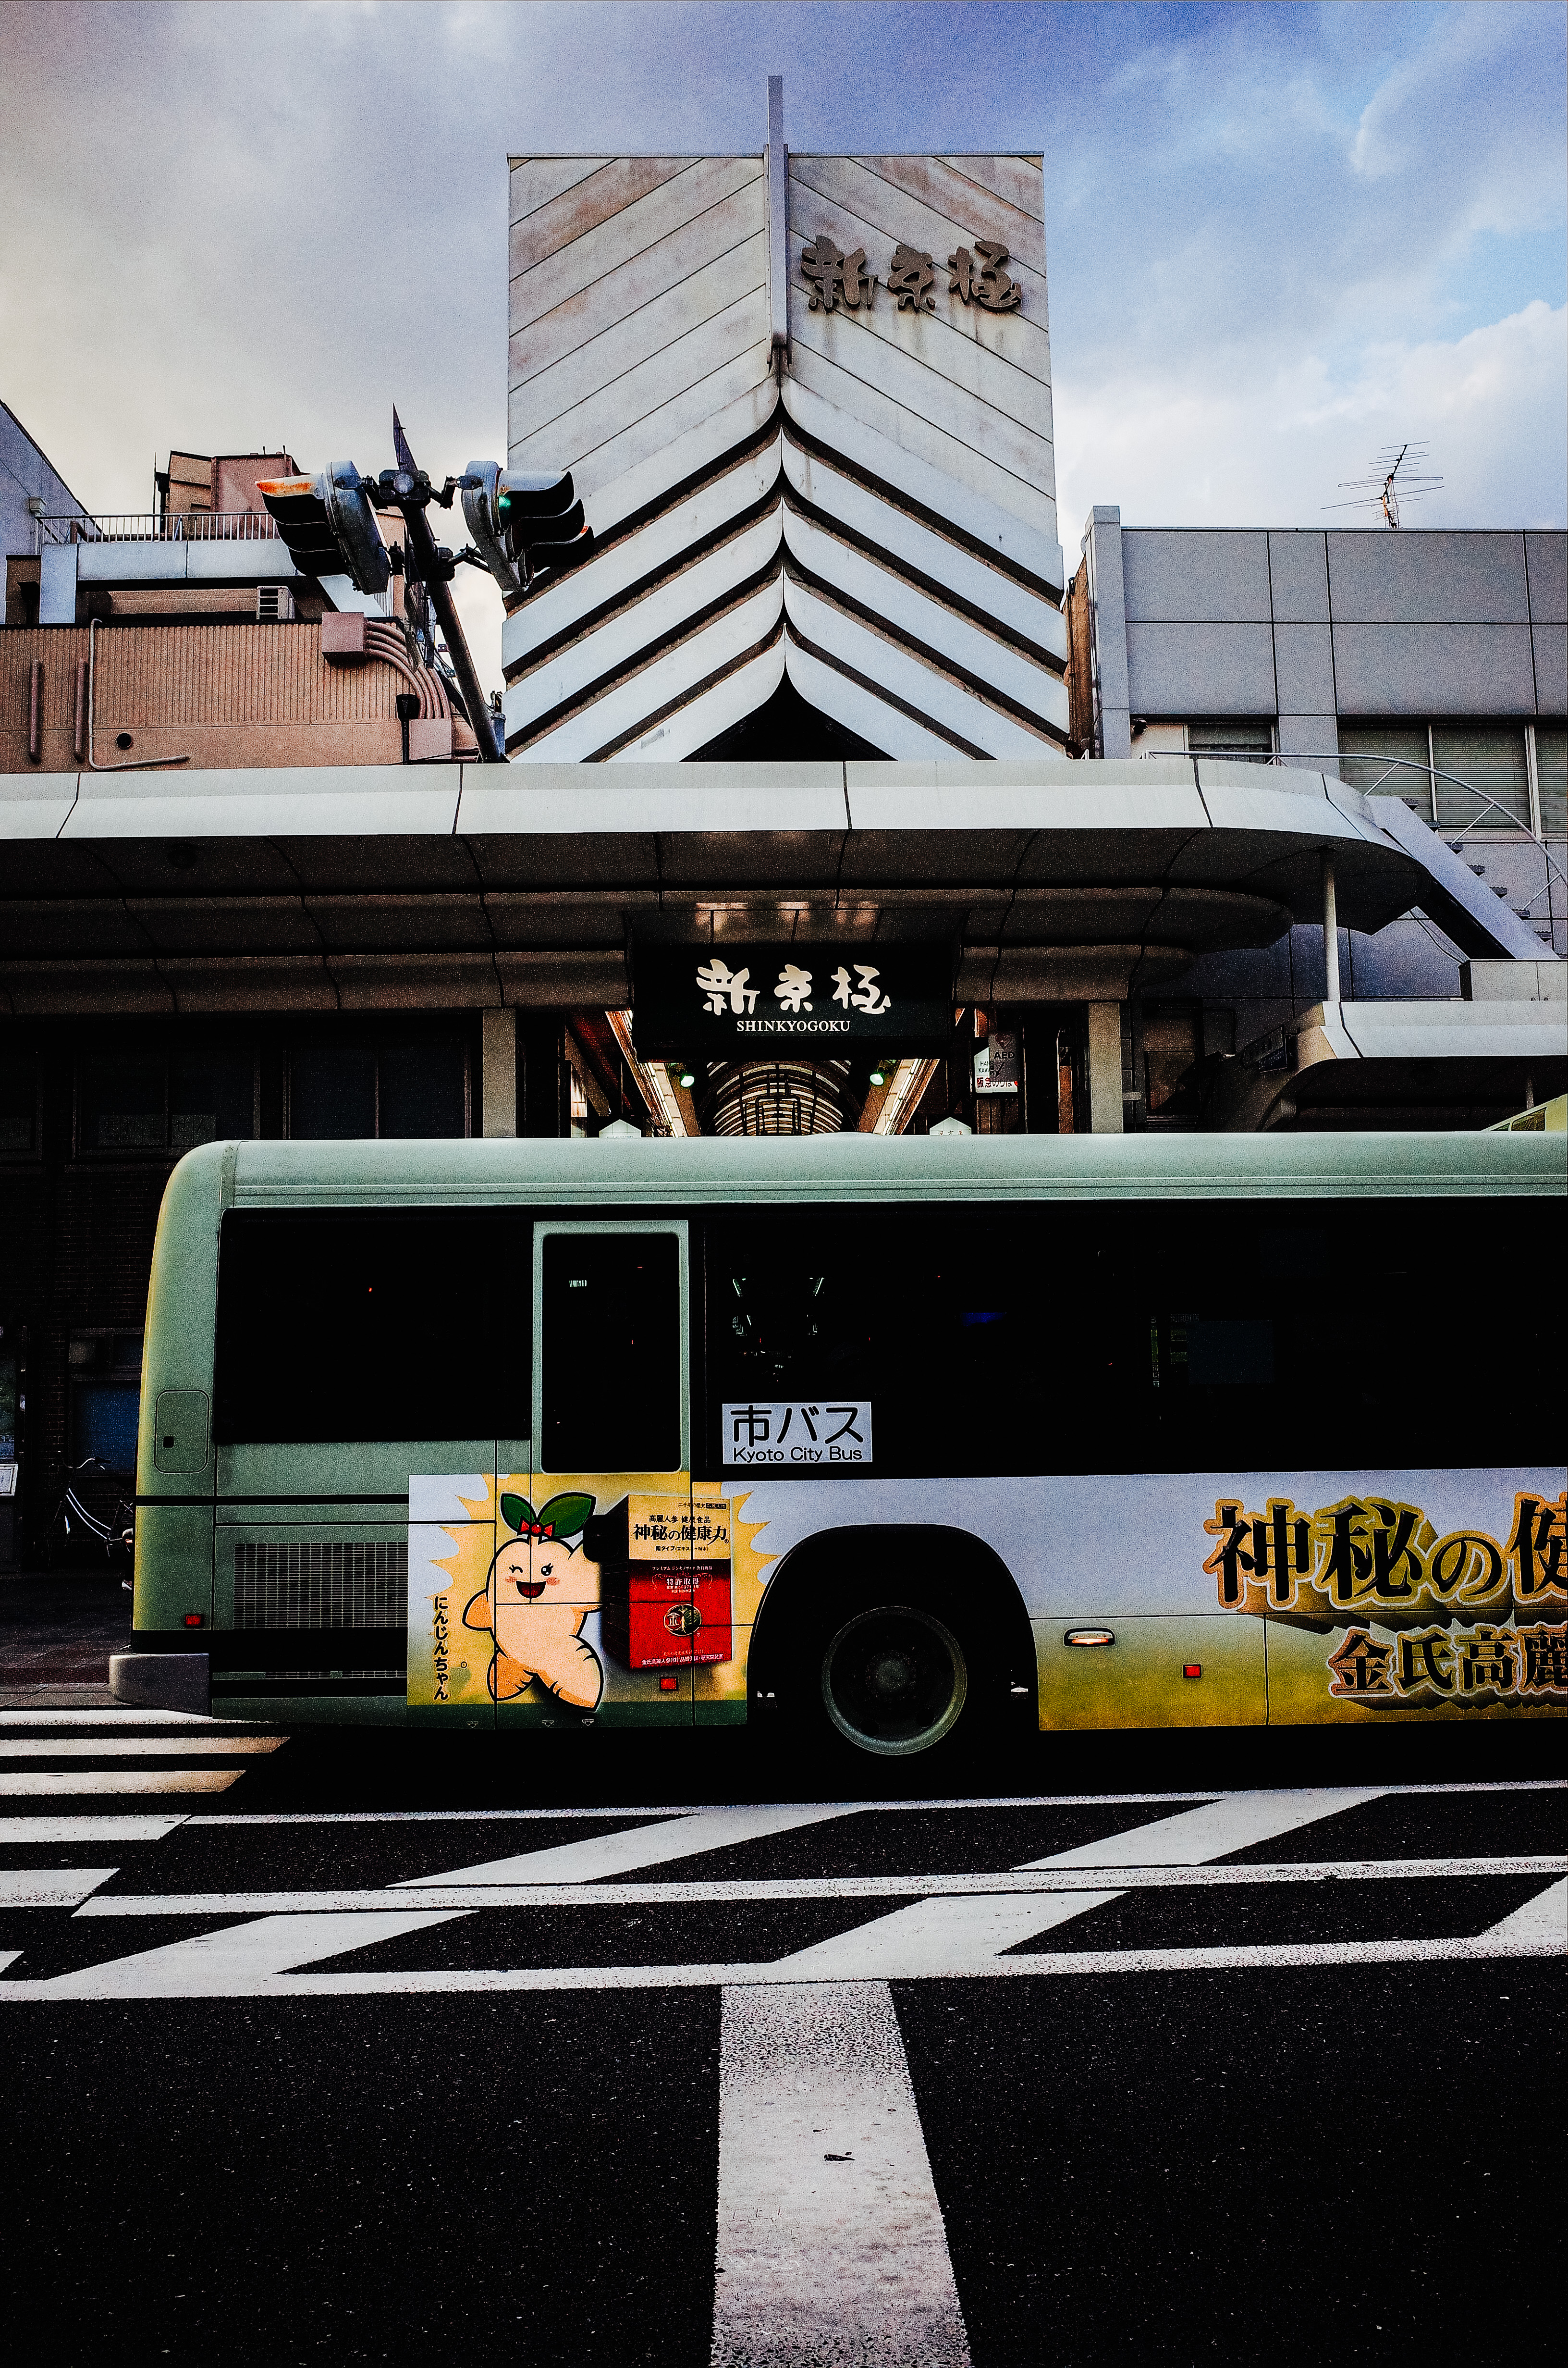 Kyoto urban landscape and bus. 2017